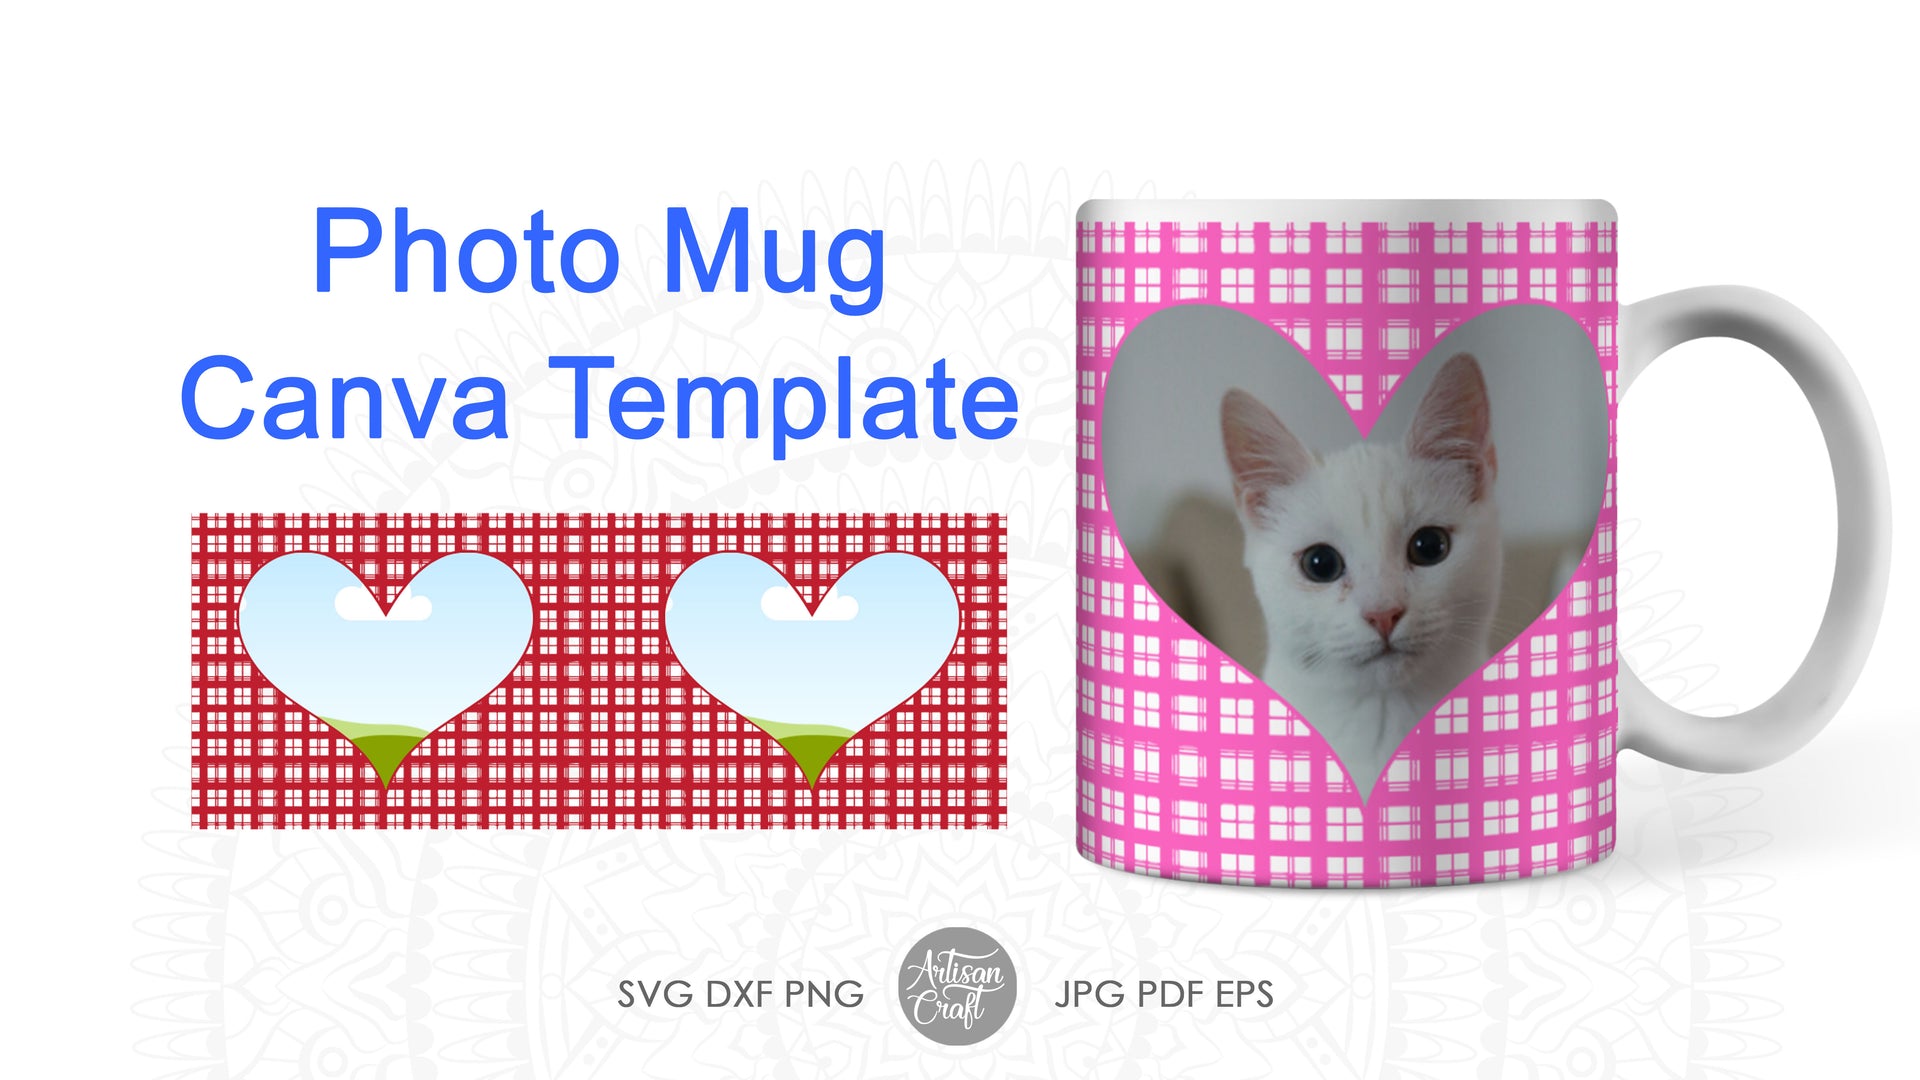 Video laden: How to use Canva templates for sublimating photo mugs